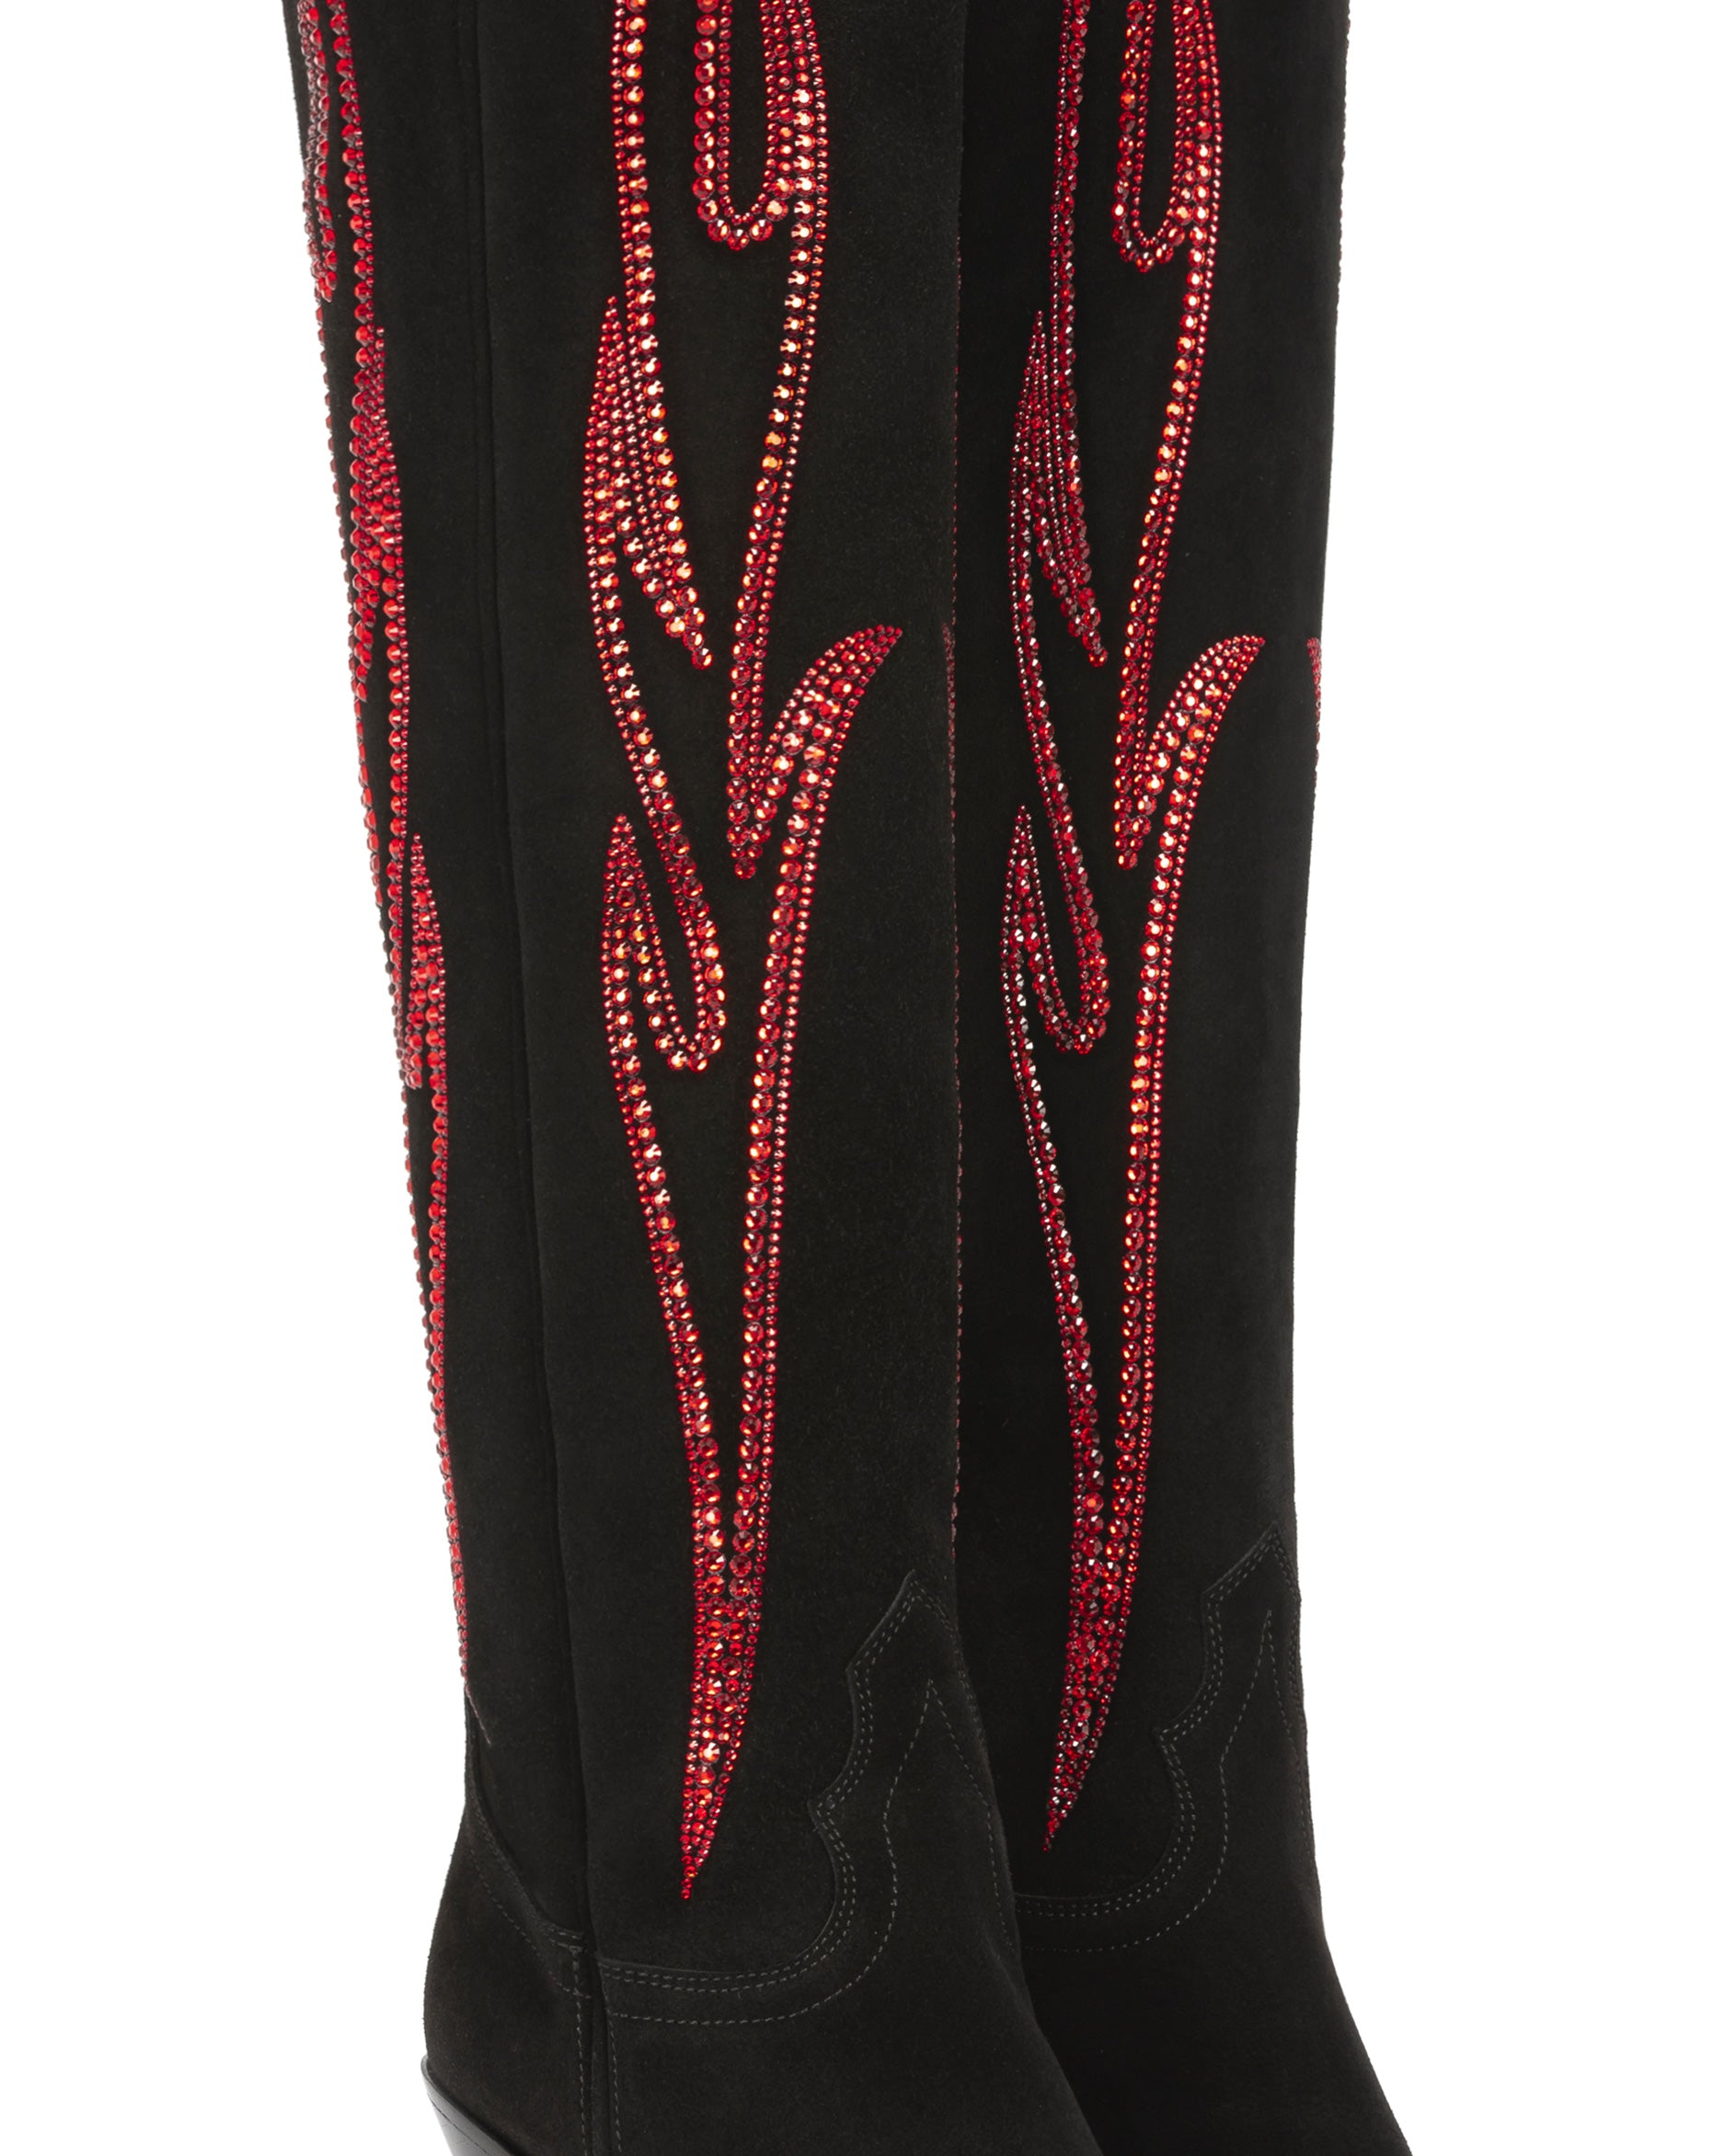     HERMOSA-90-Women_s-Over-The-Knee-Boots-in-Black-Suede-with-Red-Swarovski-Crystals_03_Detail